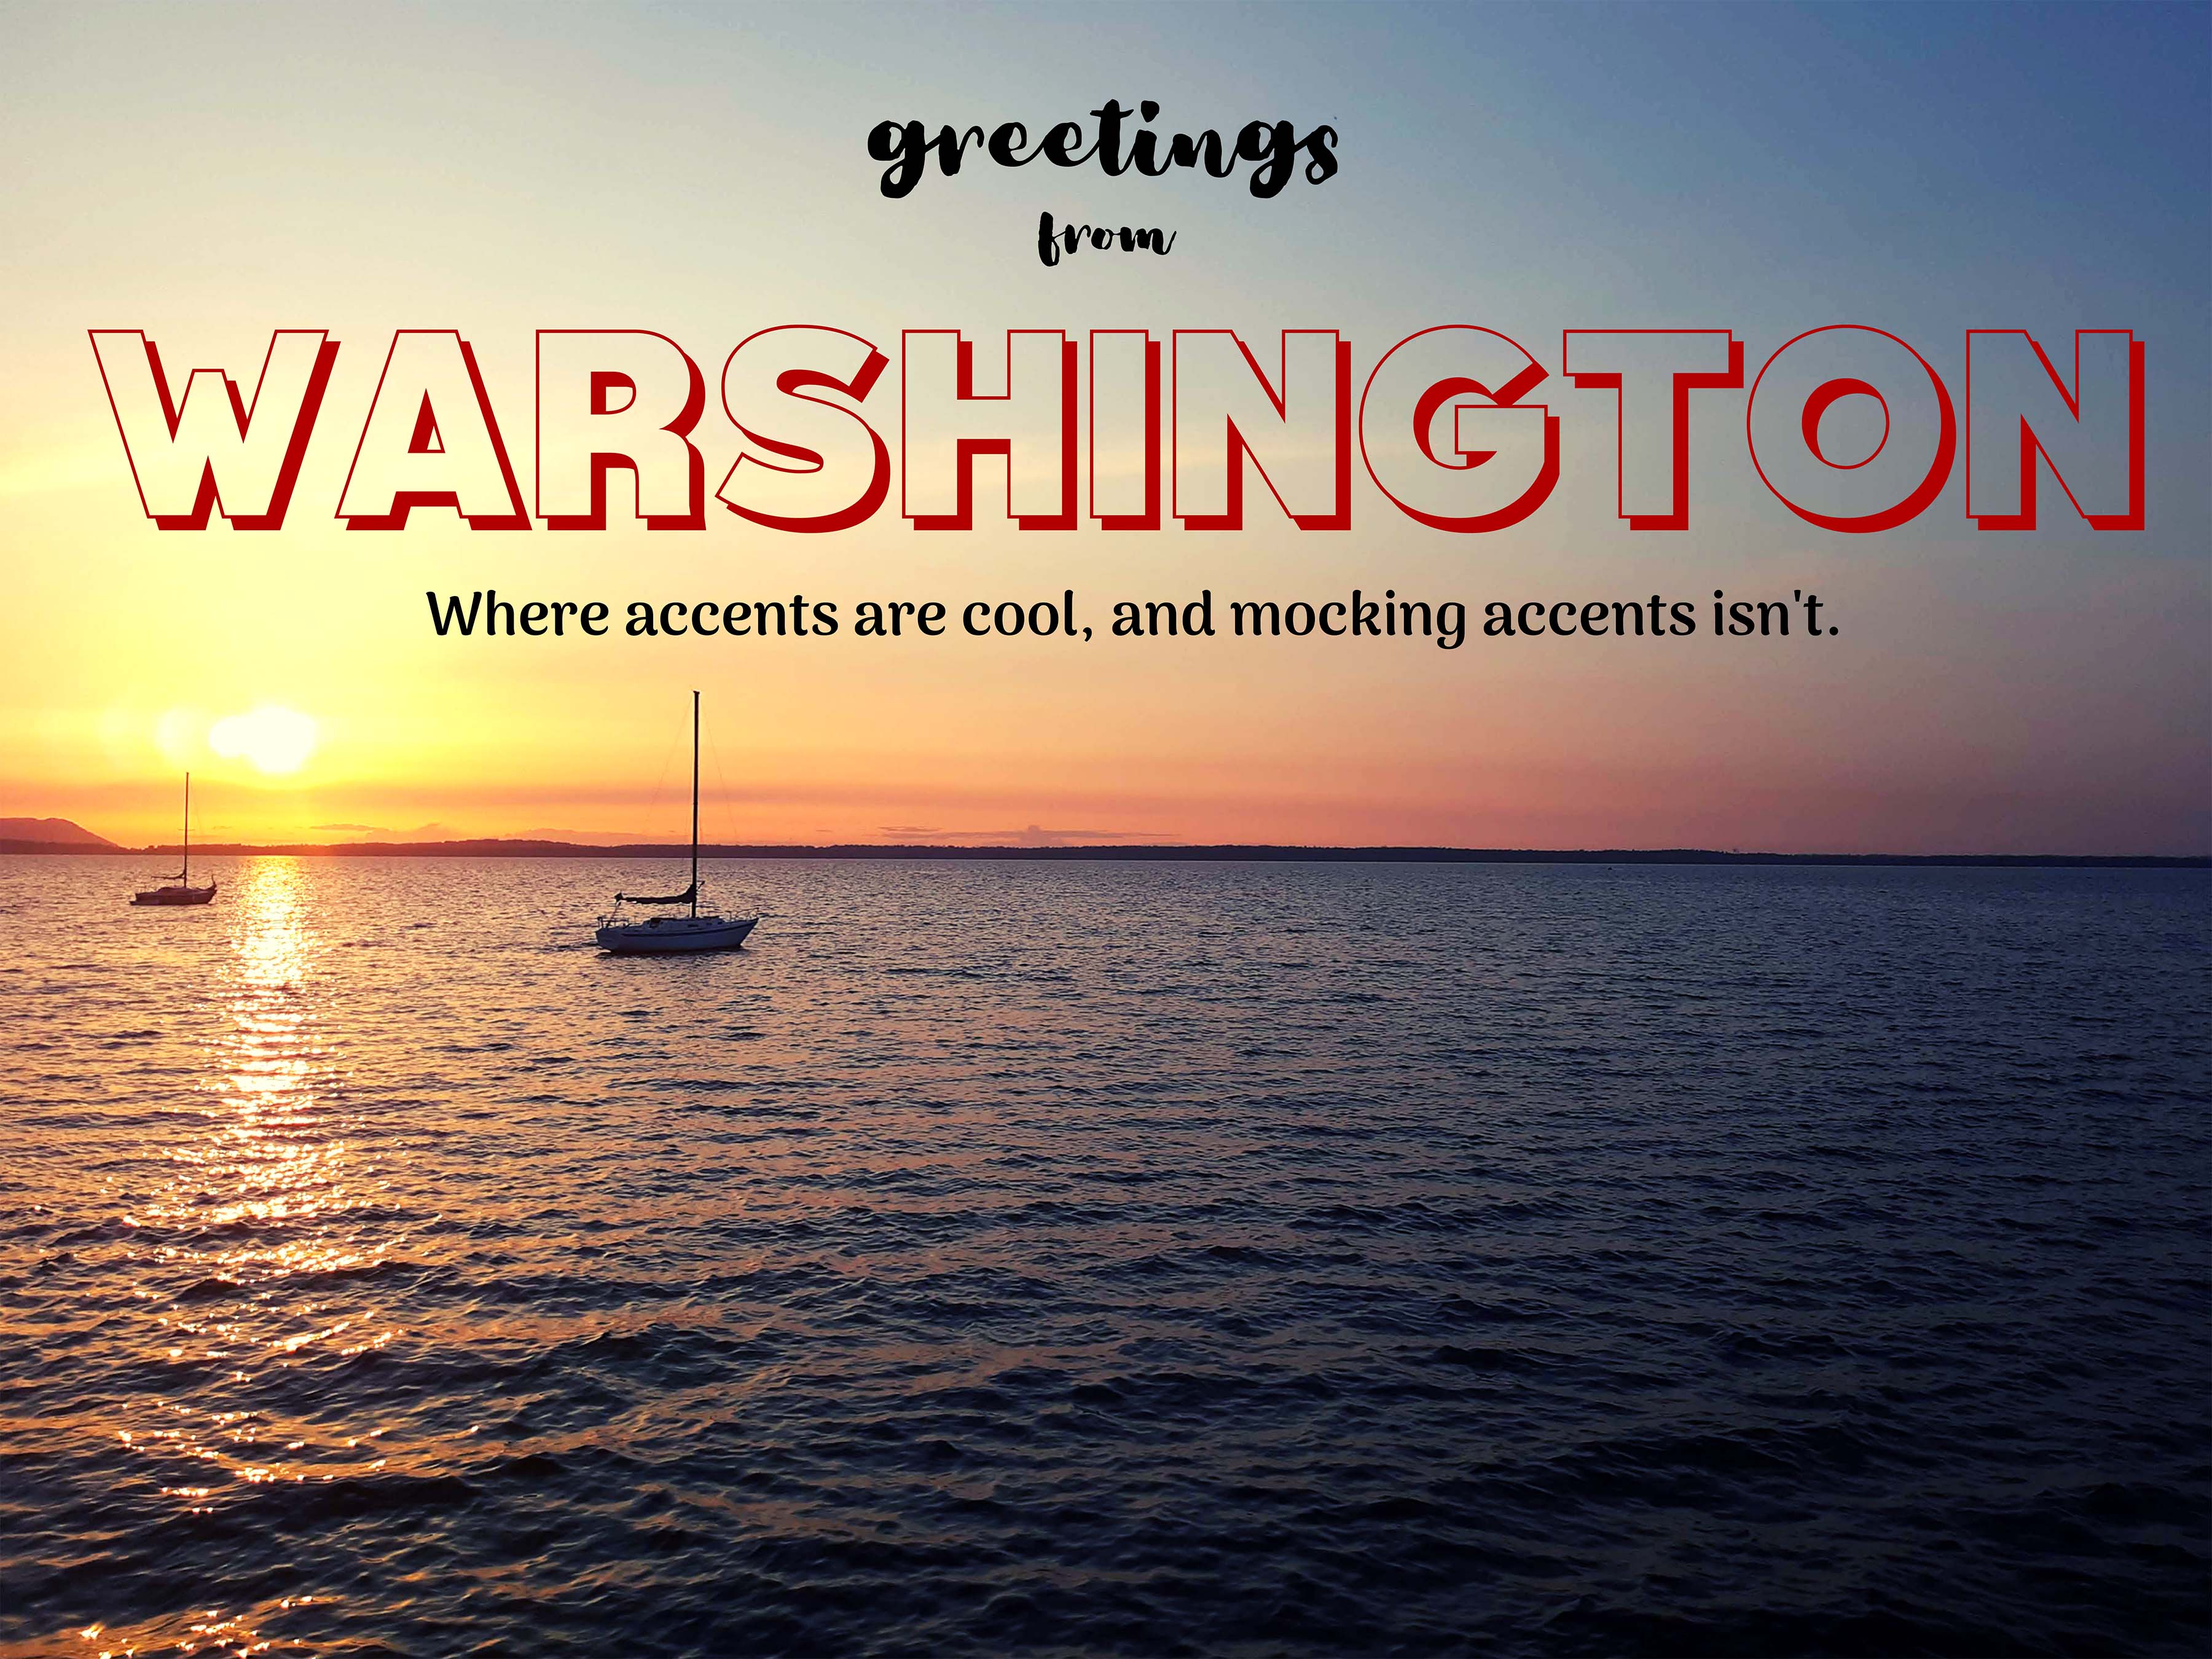 Greetings from Washington (Warshington), where accents are cool, and mocking accents isn't. Click to see full description.